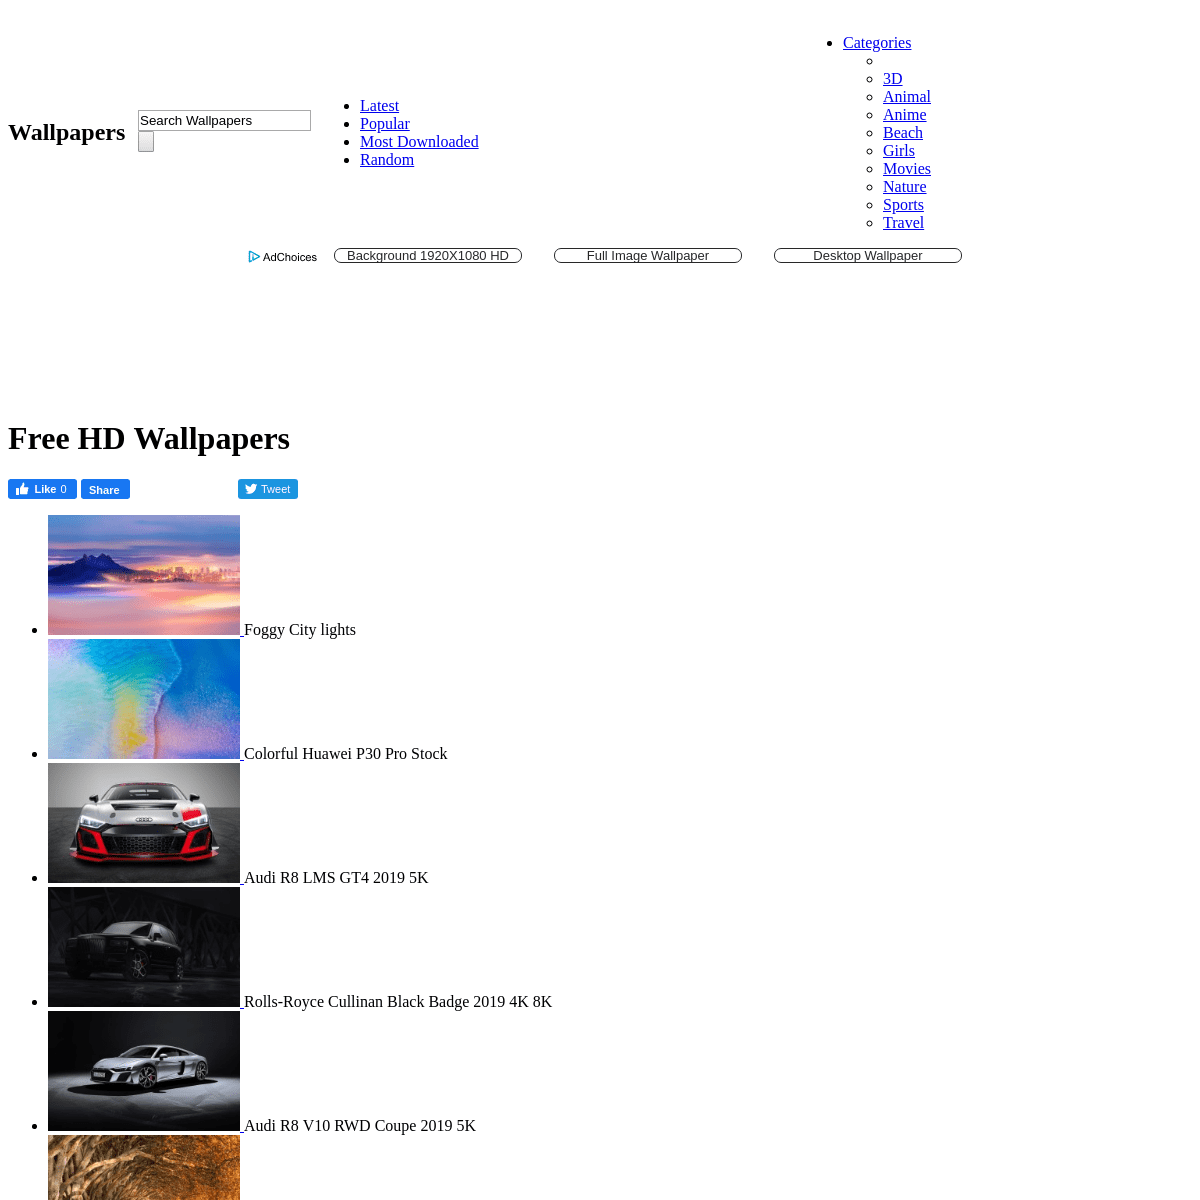 A complete backup of wallpapersprinted.com